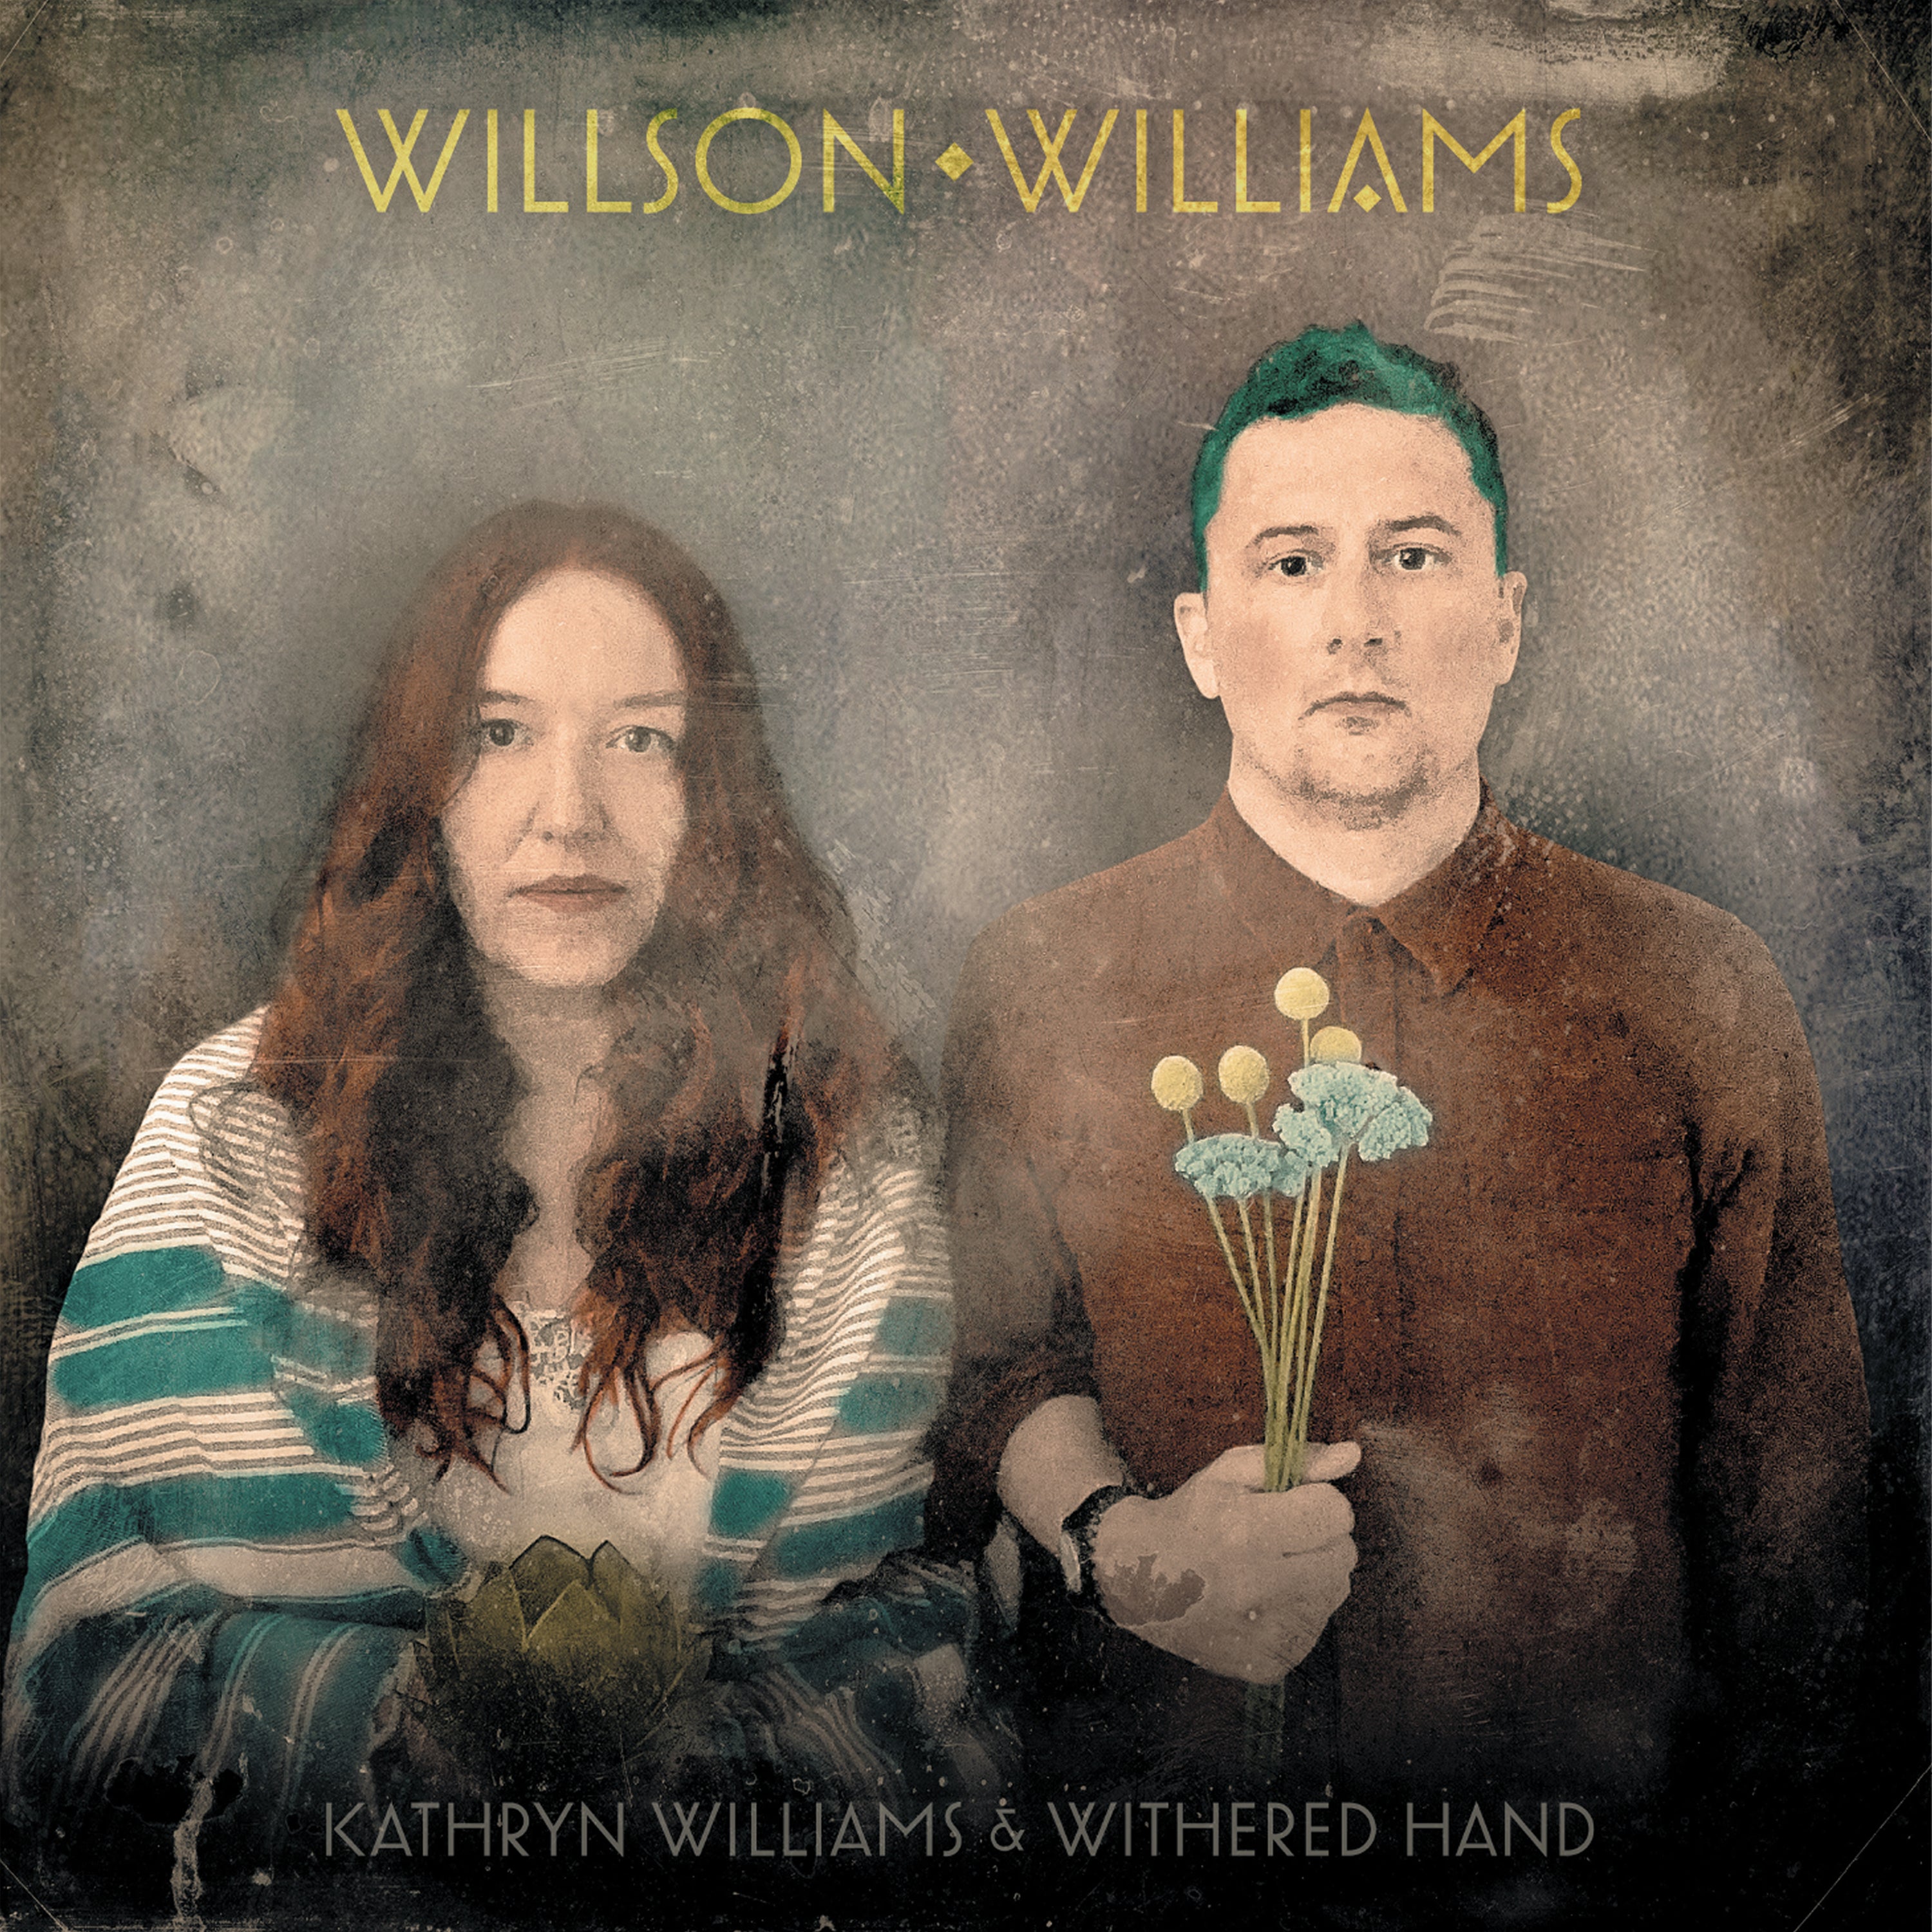 Kathryn Williams & Withered Hand - Wilson Williams: Vinyl LP